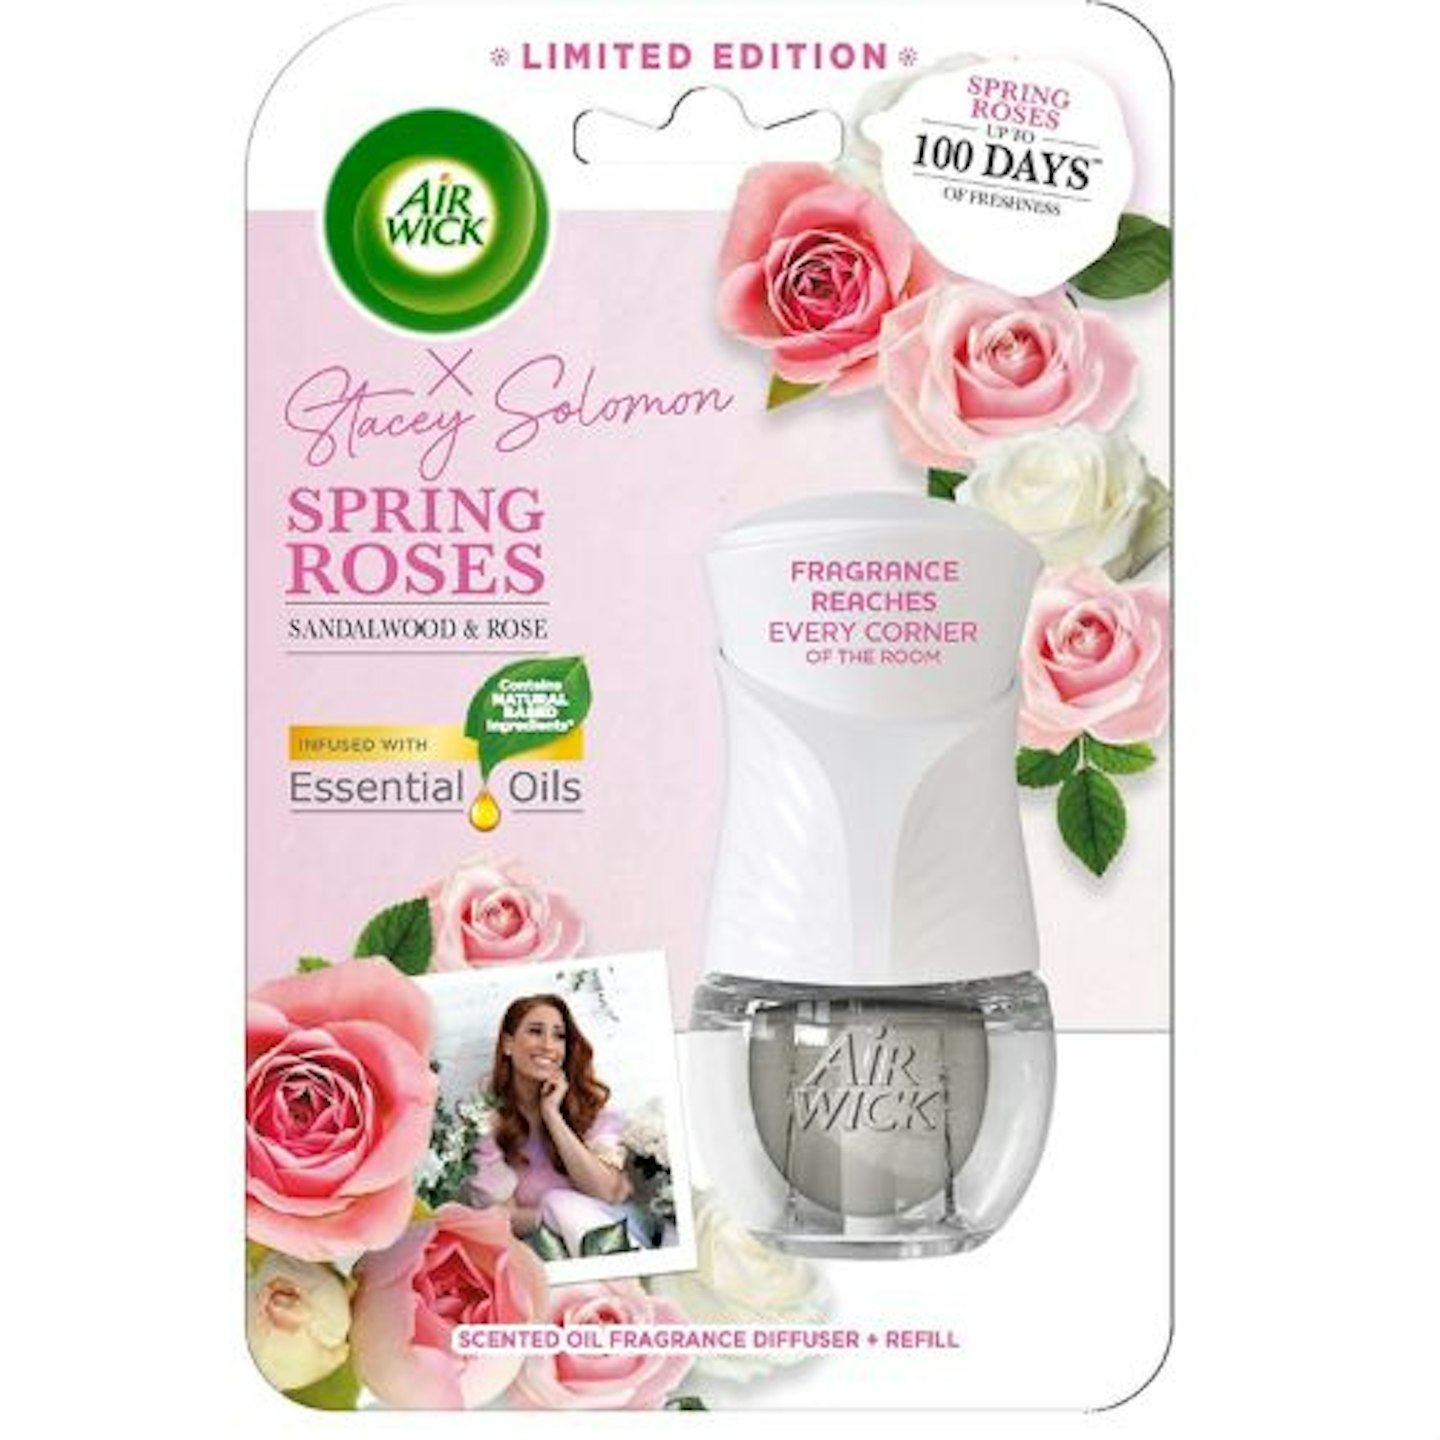 Air Wick Spring Roses Scented Oil Electrical Plug-In Diffuser 19ml